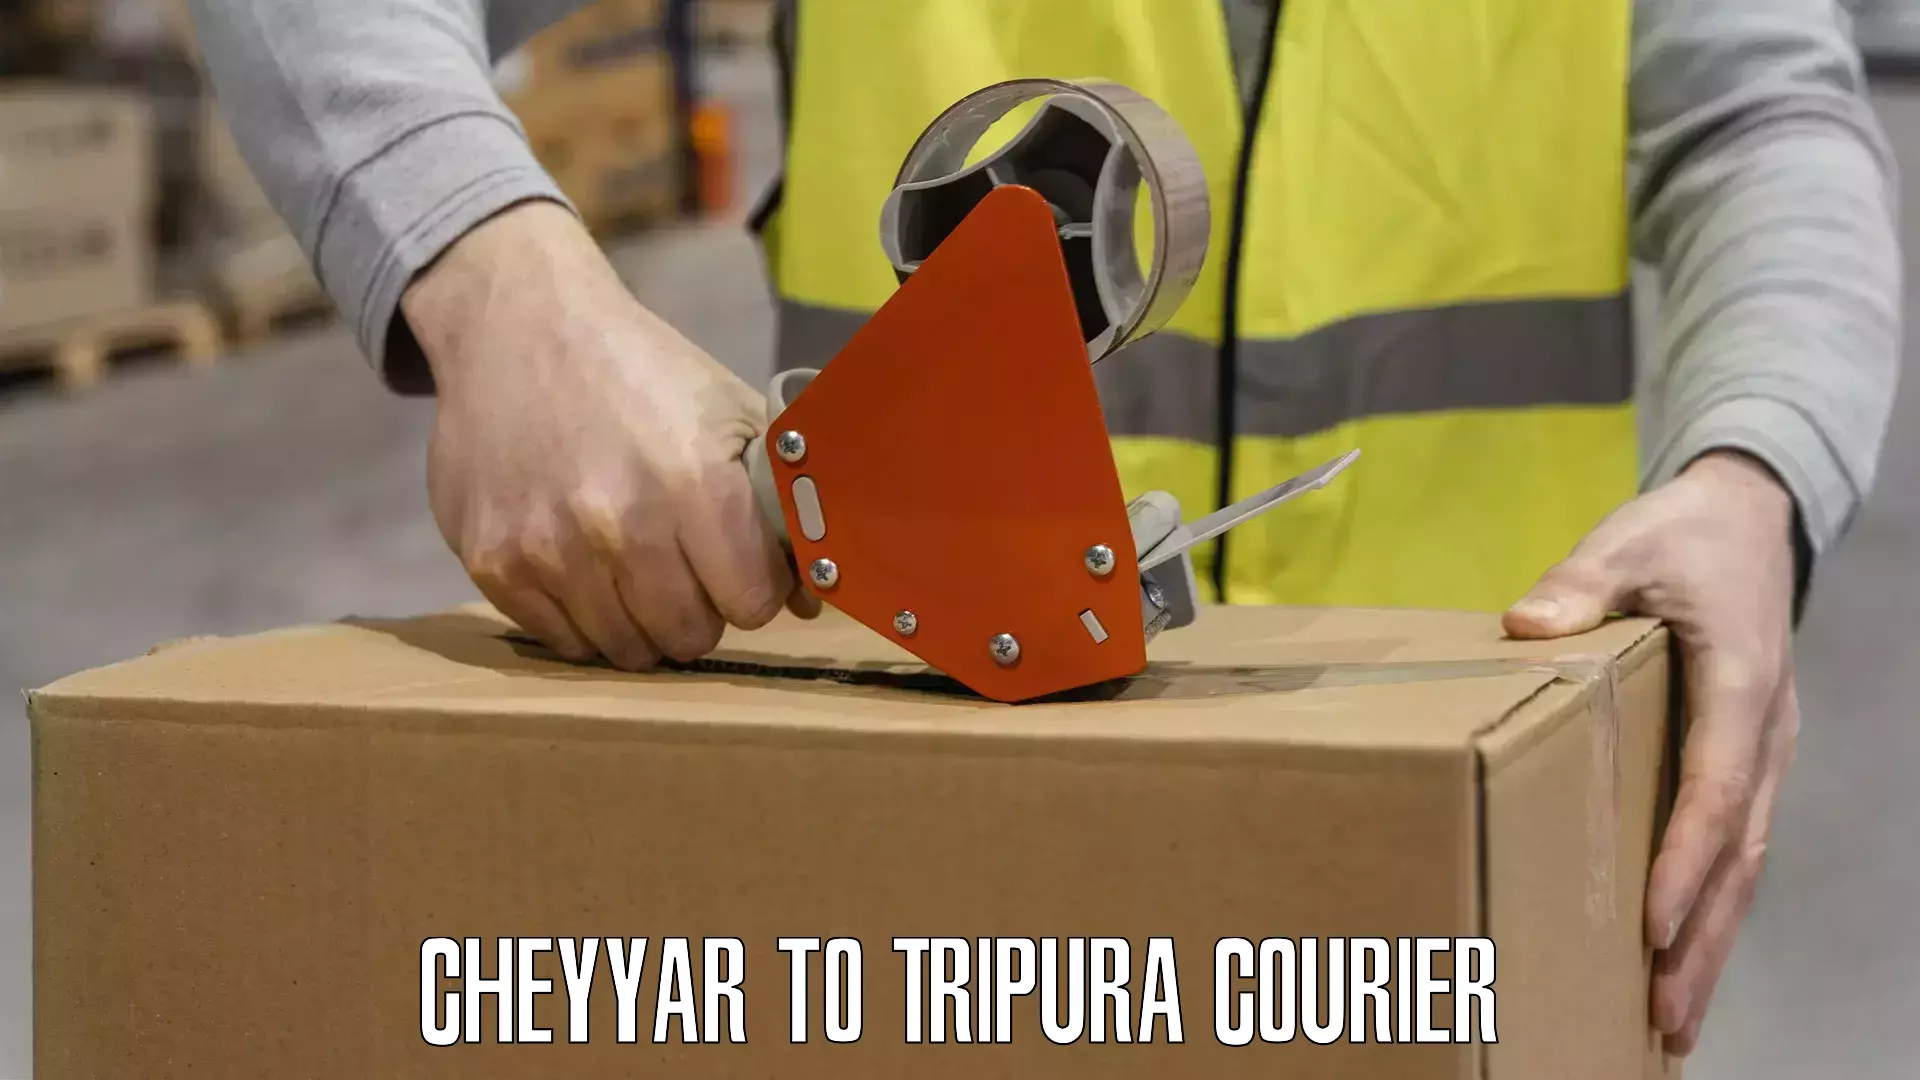 24/7 courier service in Cheyyar to Tripura